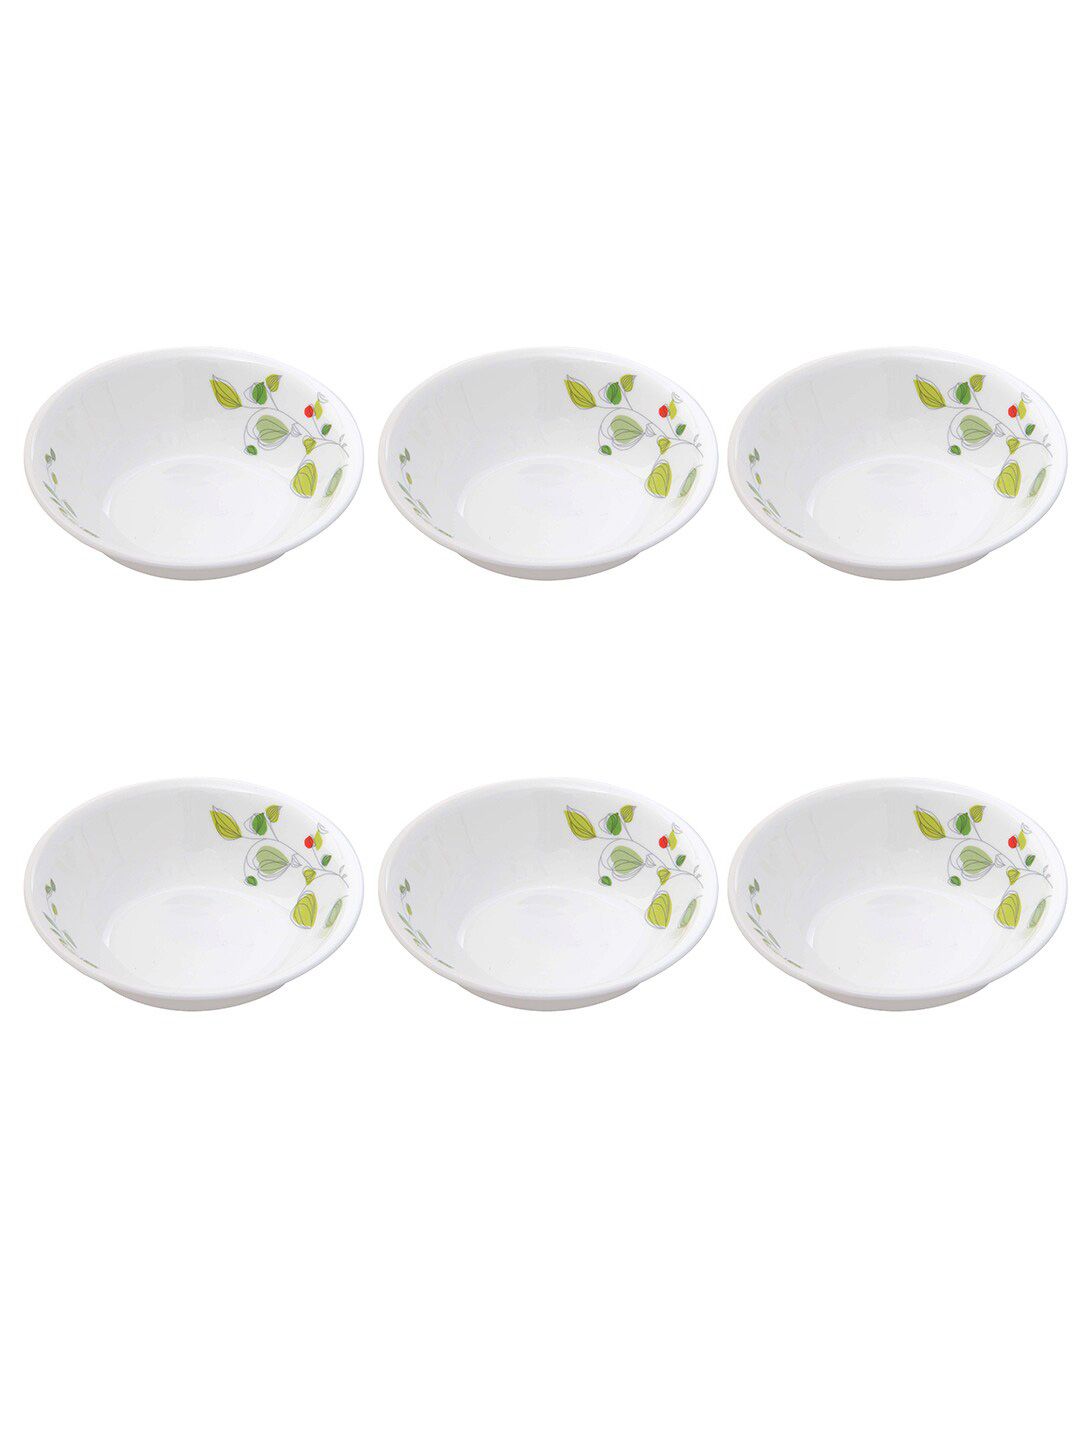 Corelle White & Green 6 Pieces Floral Printed Glossy Bowls Price in India